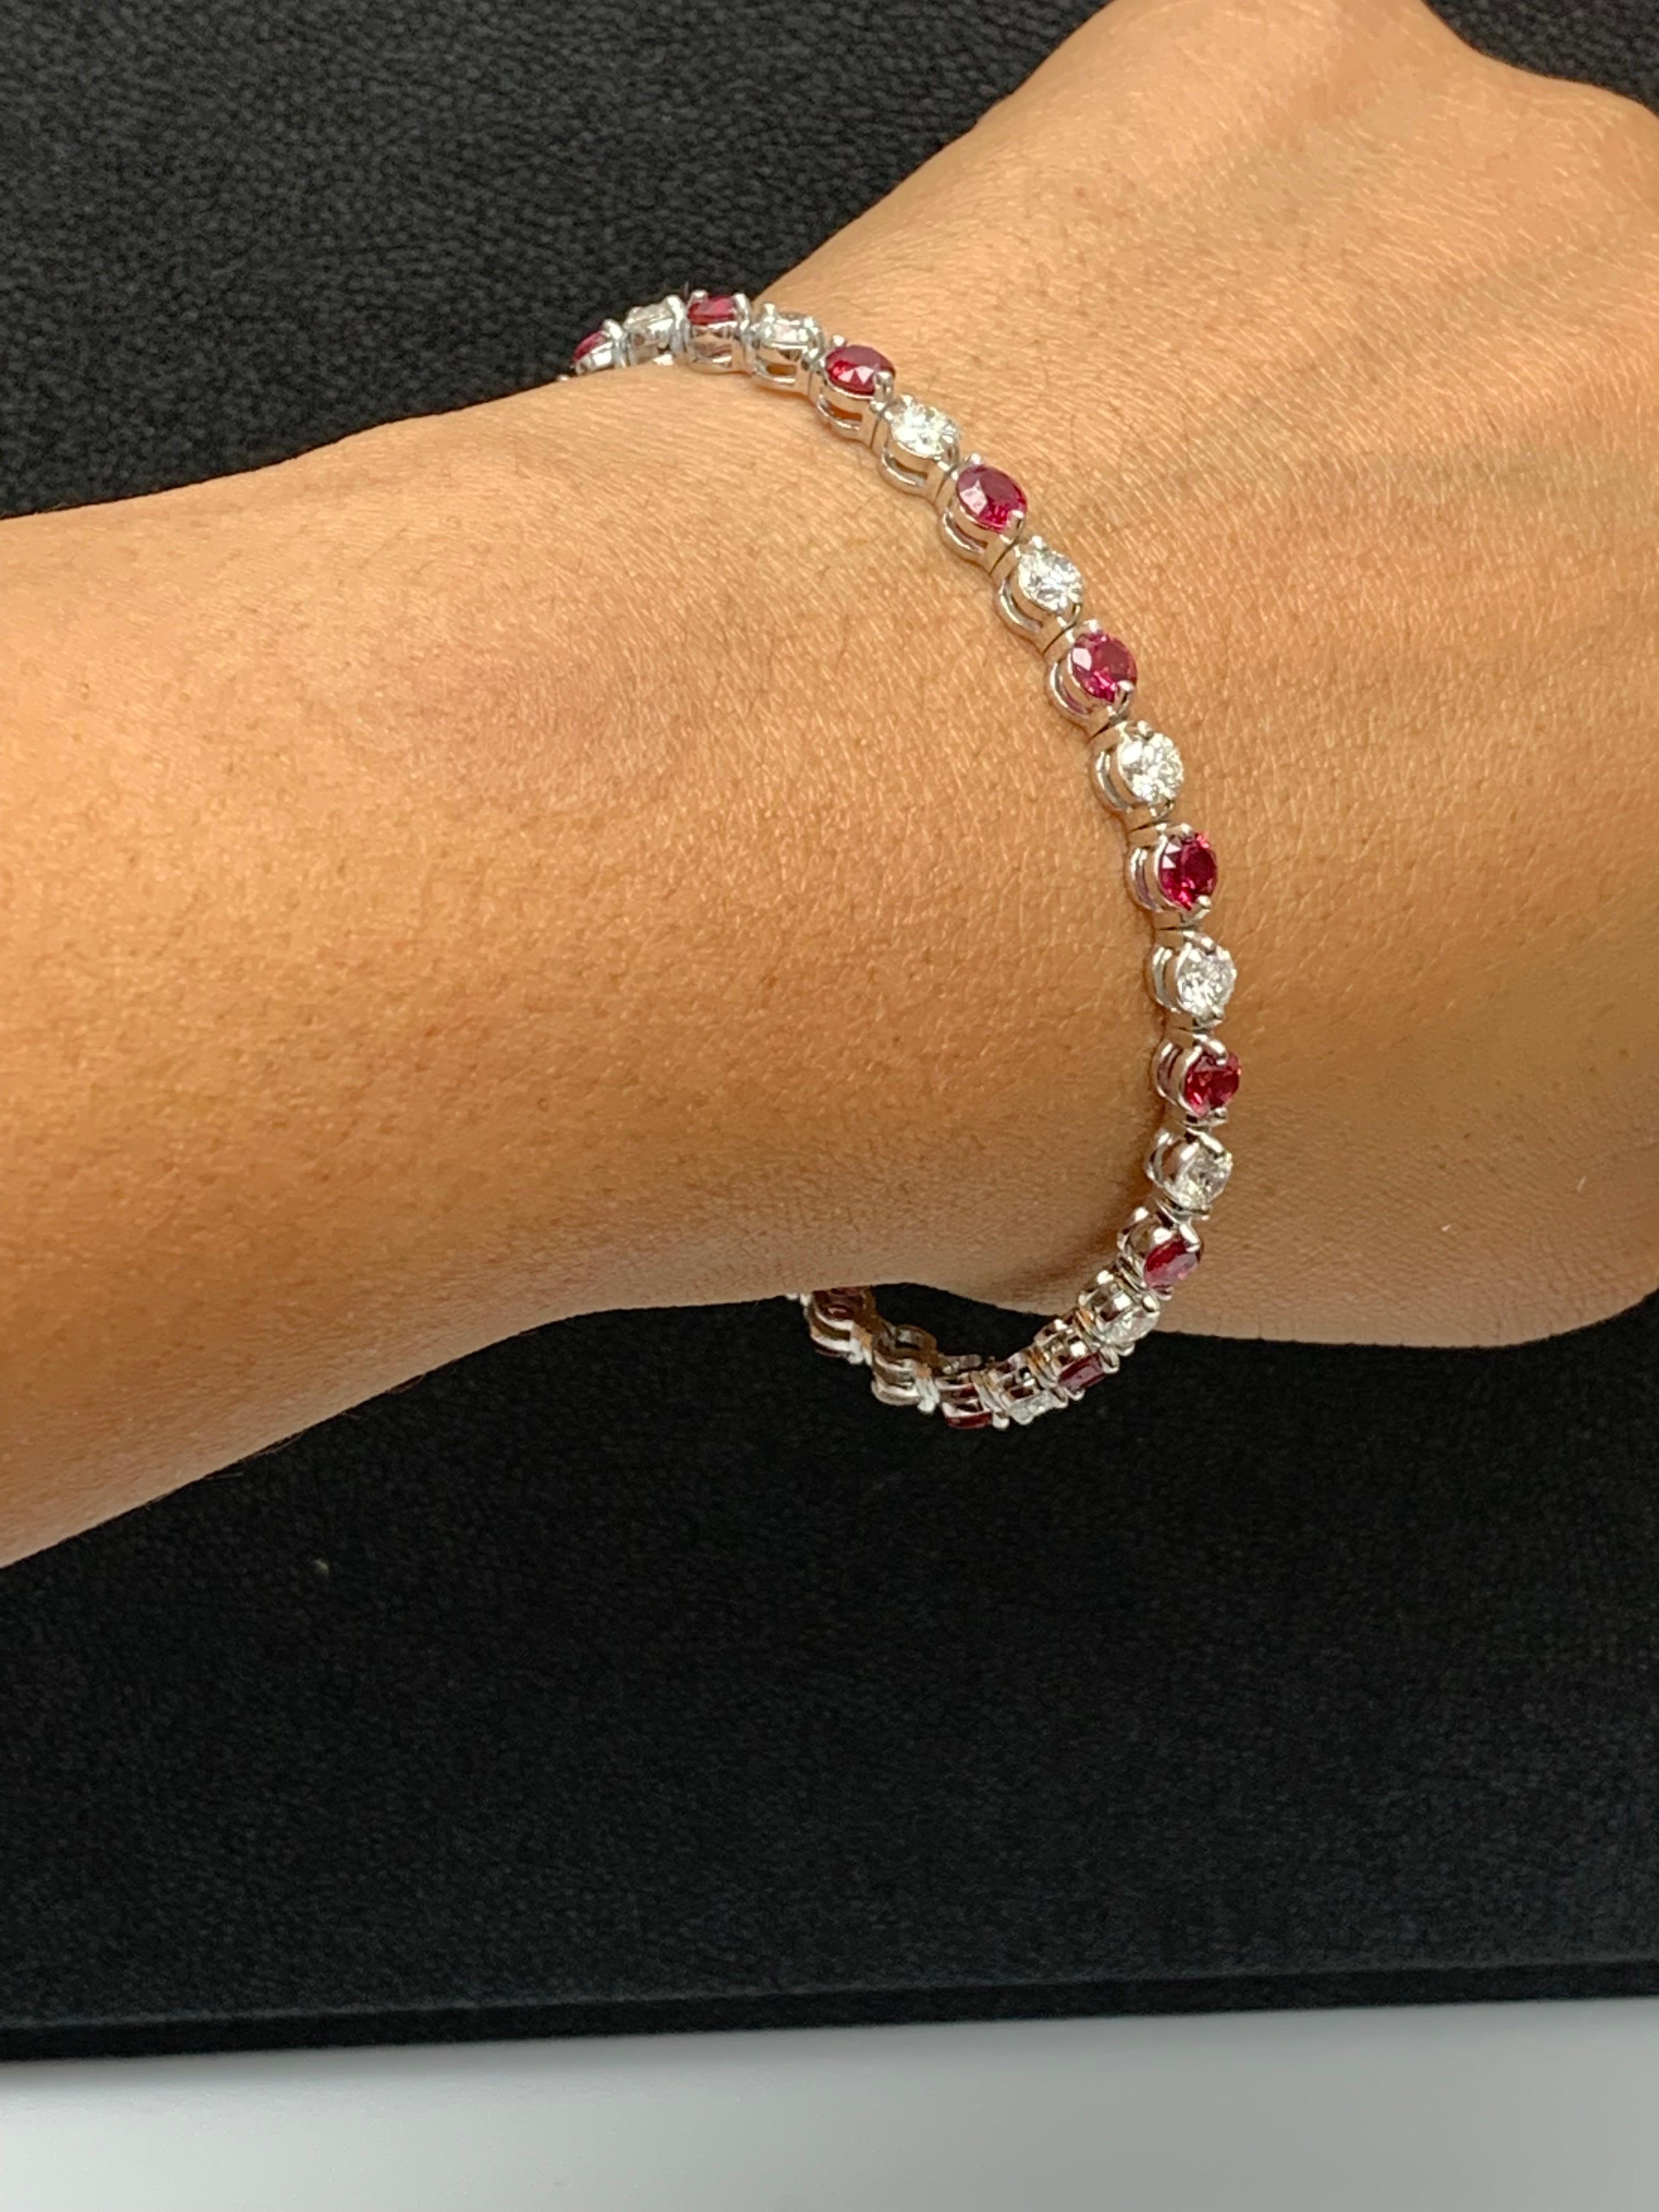 A stunning bracelet set with 16 Vibrant Red Rubies weighing 4.55 carat total. Alternating these rubies are 16 sparkling round diamonds weighing 3.92 carats in total. Set in polished 14k white gold. Double lock mechanism for maximum security. A